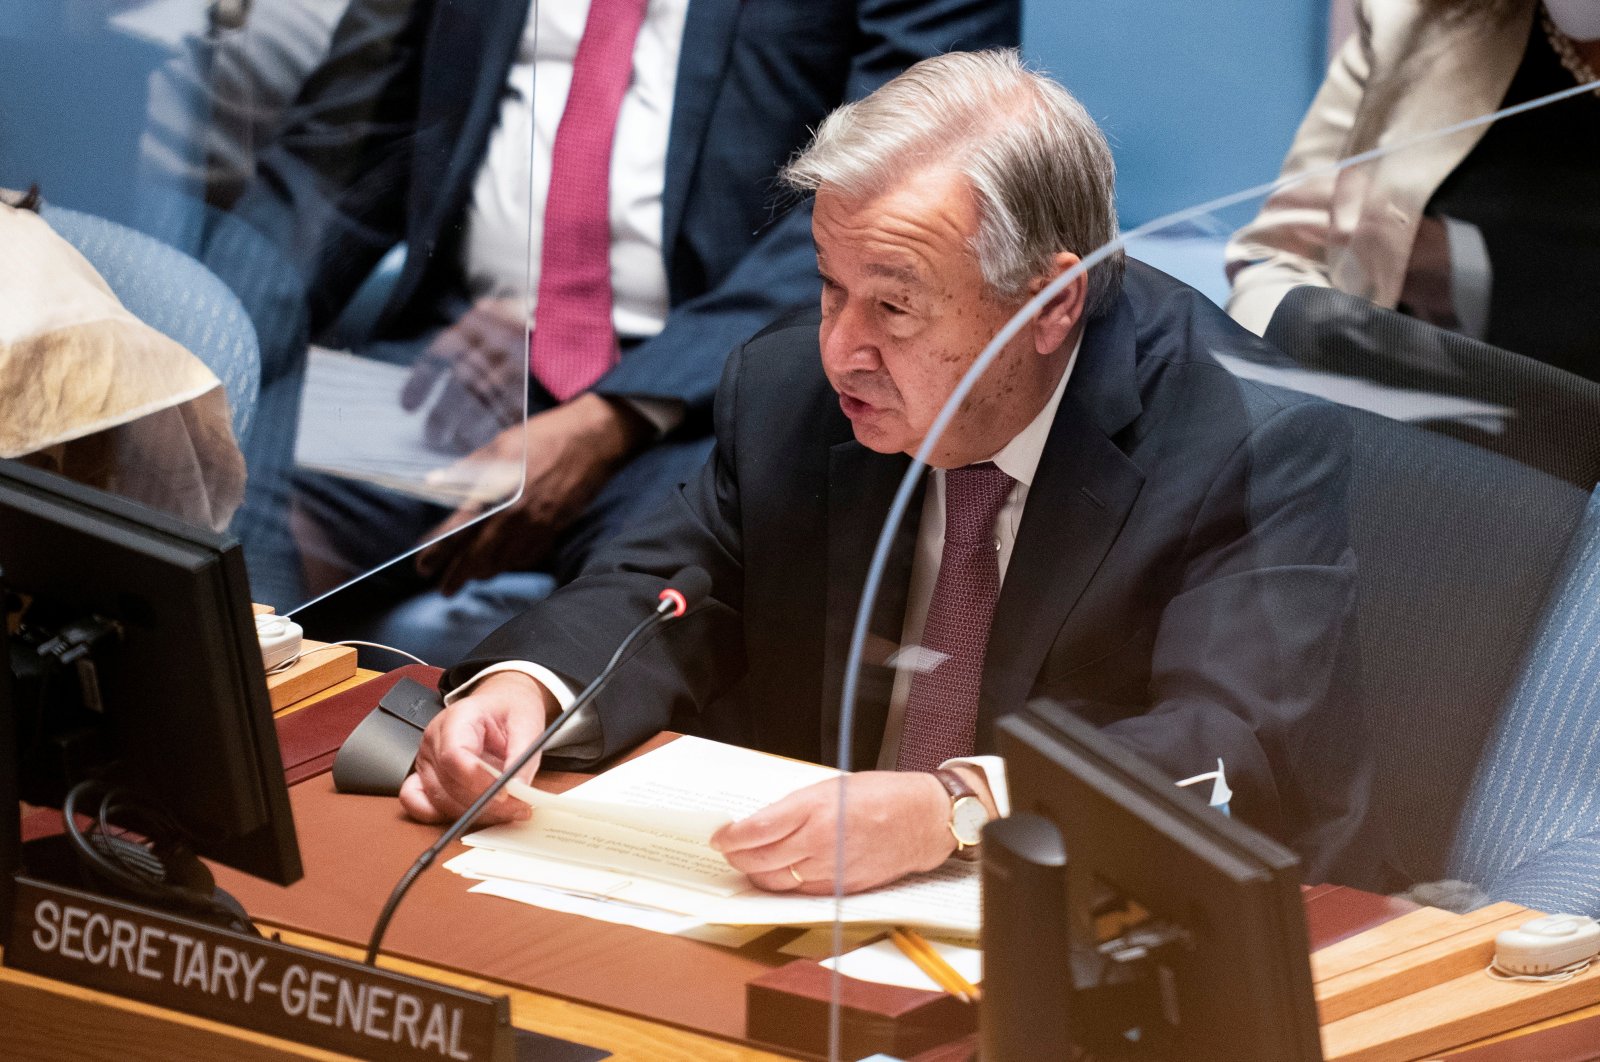 United Nations Secretary-General Antonio Guterres speaks during a meeting of the United Nations Security Council at the 76th Session of the U.N. General Assembly in New York, U.S., Sept. 23, 2021. (Reuters Photo)